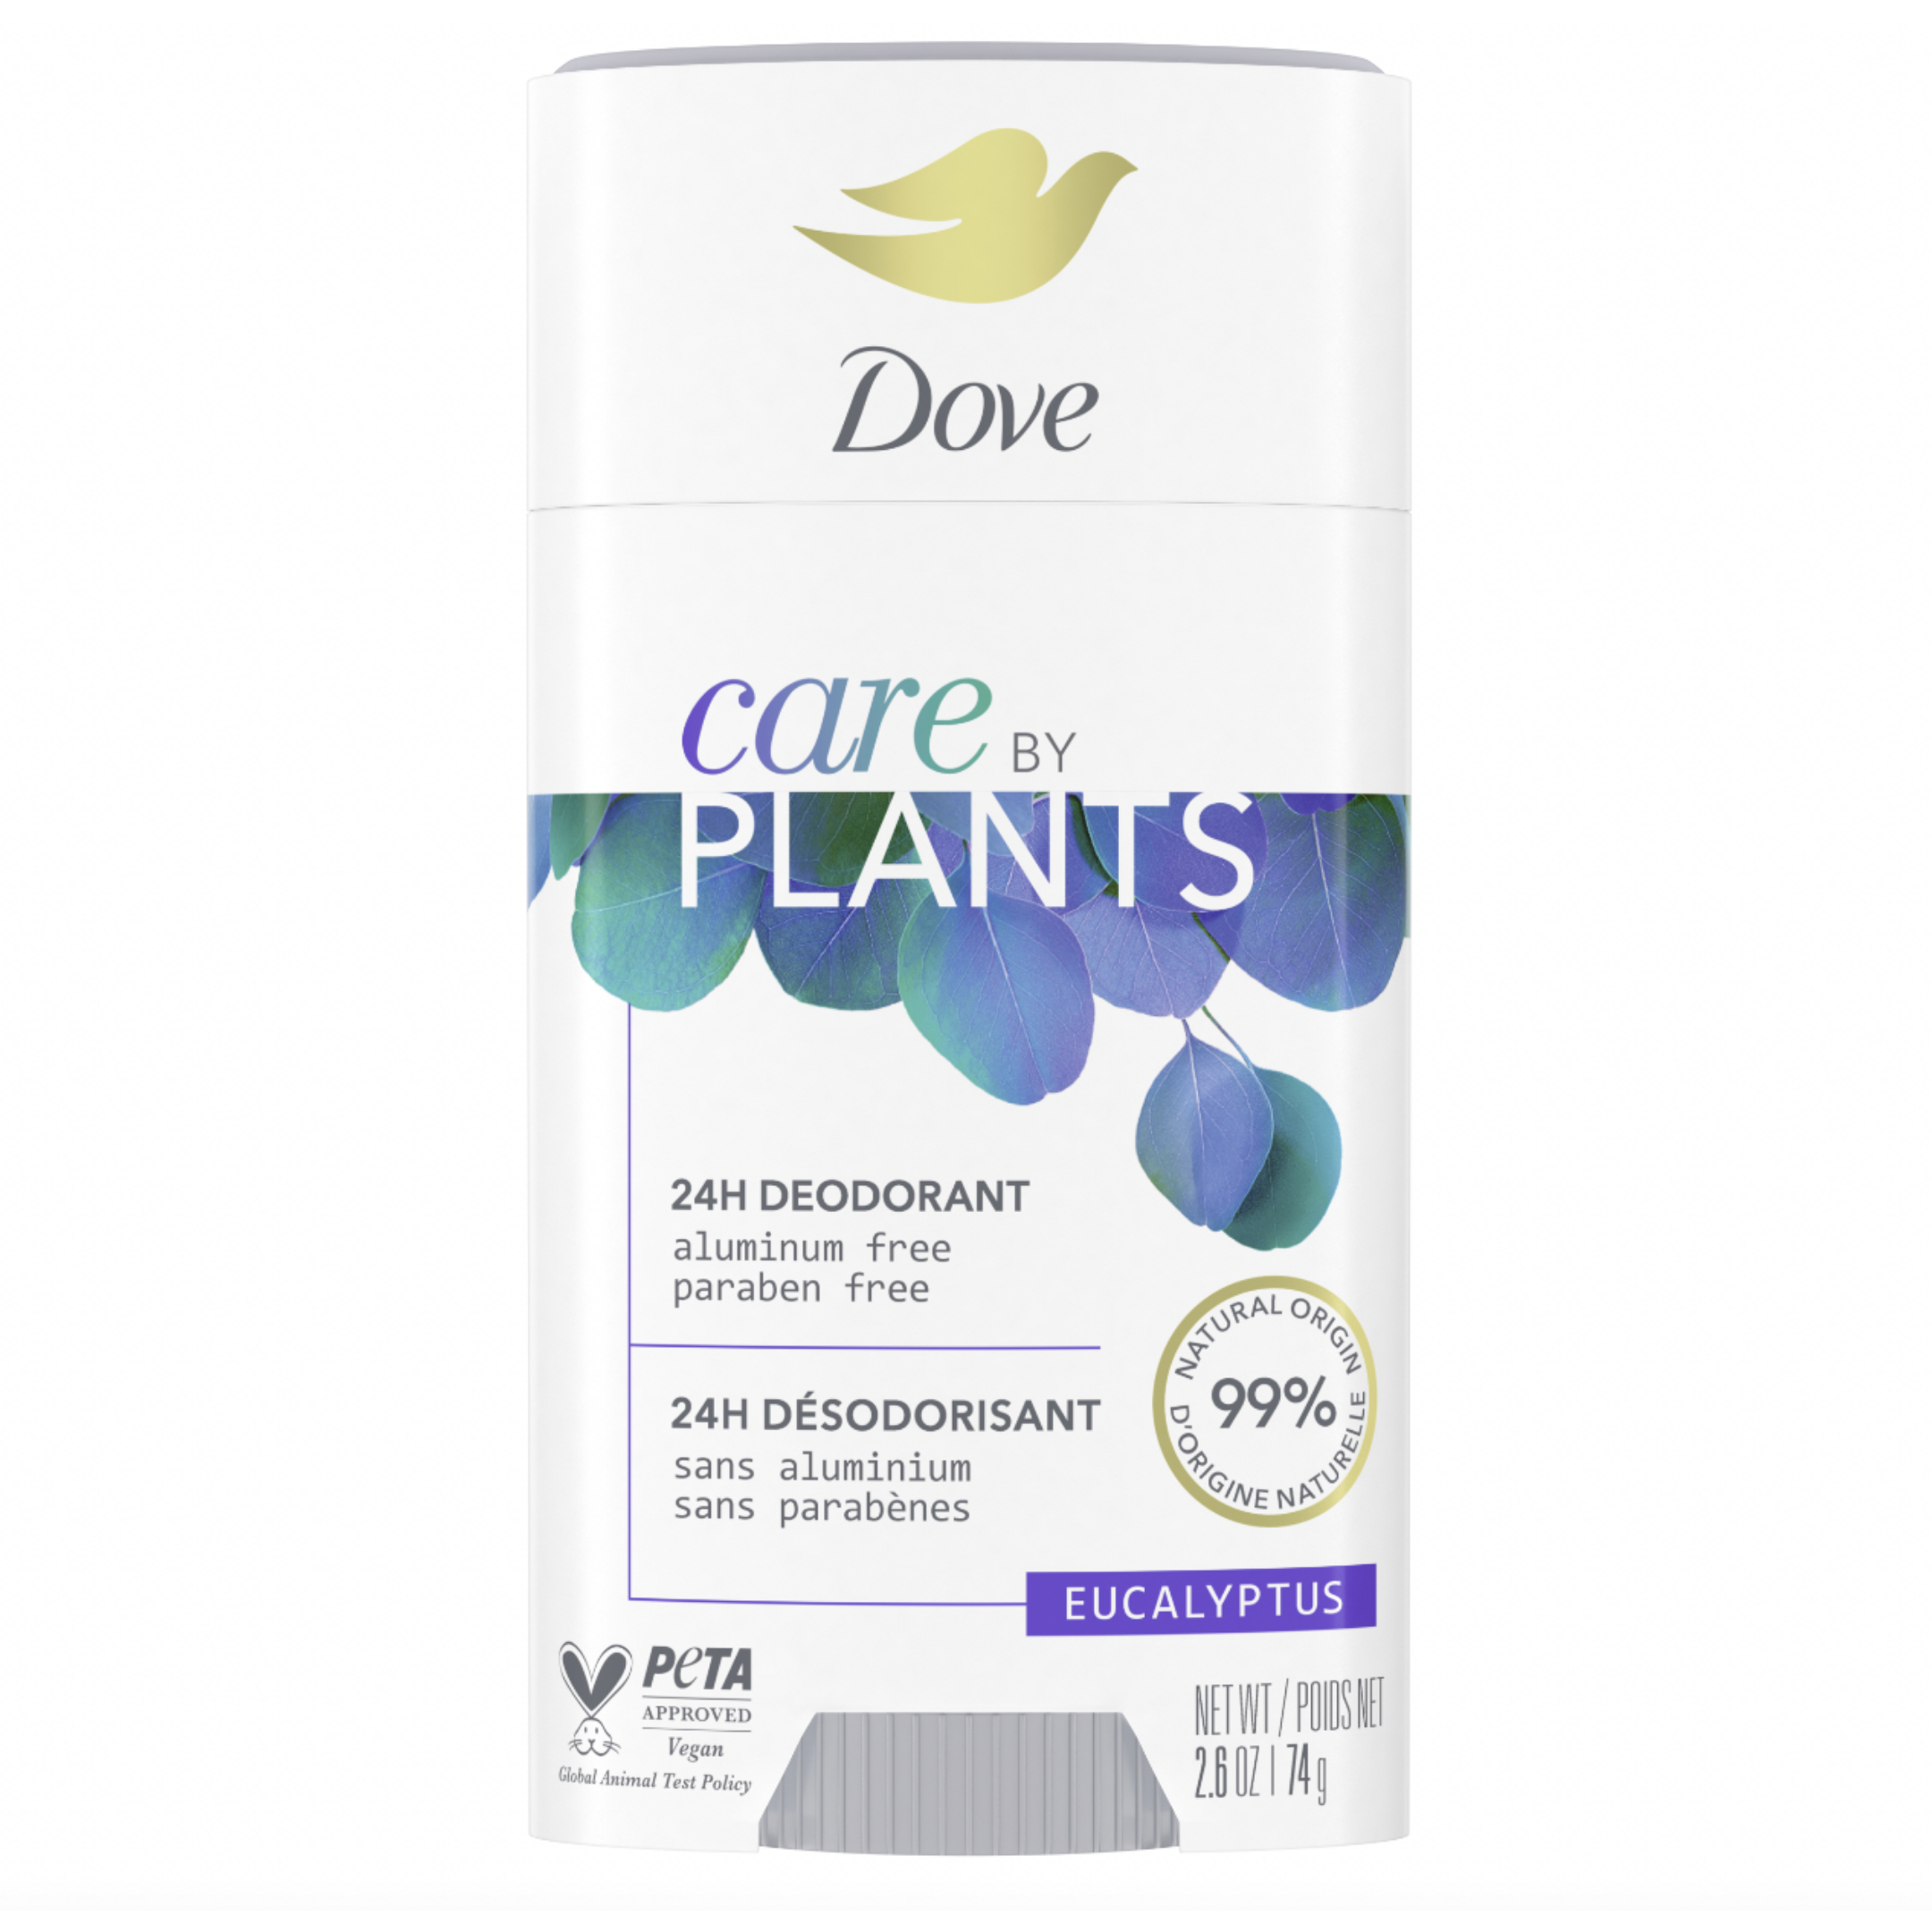 Dove's Newest Deodorant Line Is Natural, Vegan And Plant Based